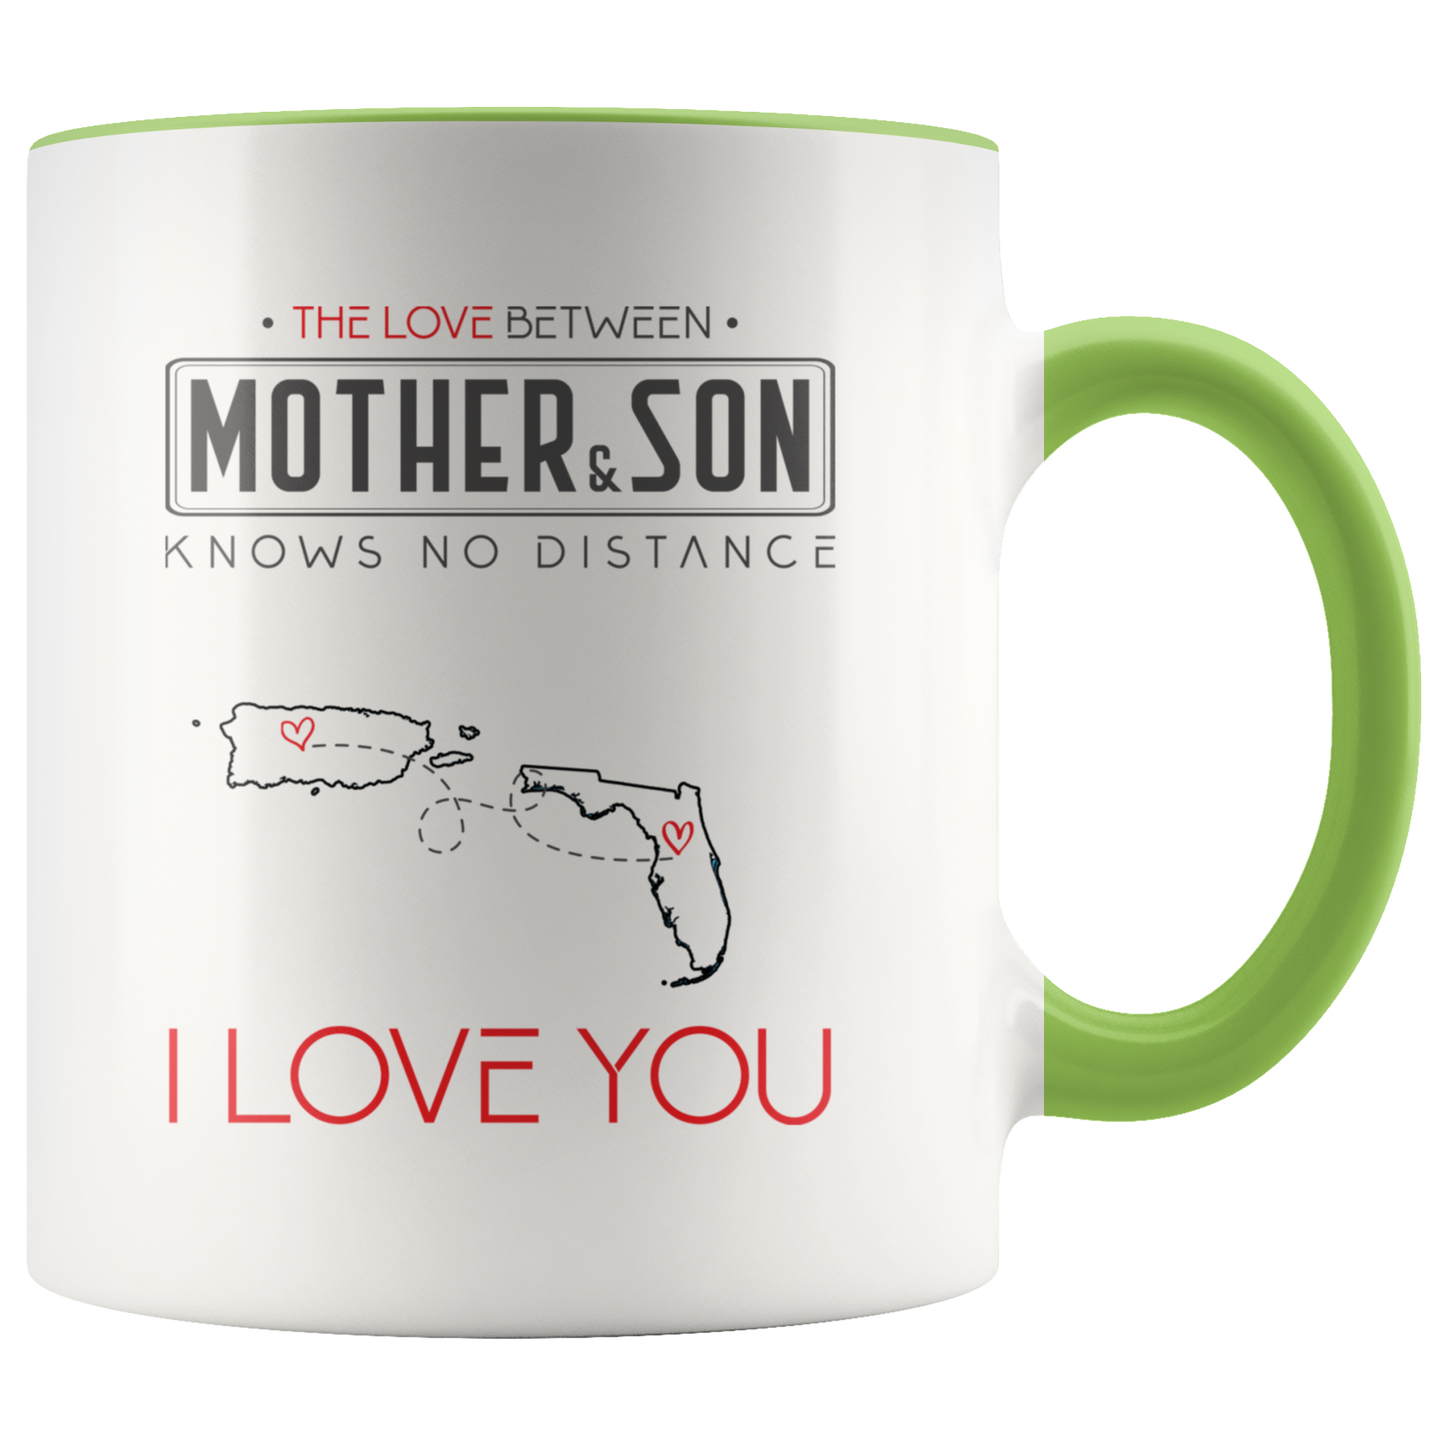 cust_80801_7250-sp-23655 - [ Puerto Rico | Florida | Mother And Son ]Mother And Son Mug 11 oz - The Love Between Mother And Son K